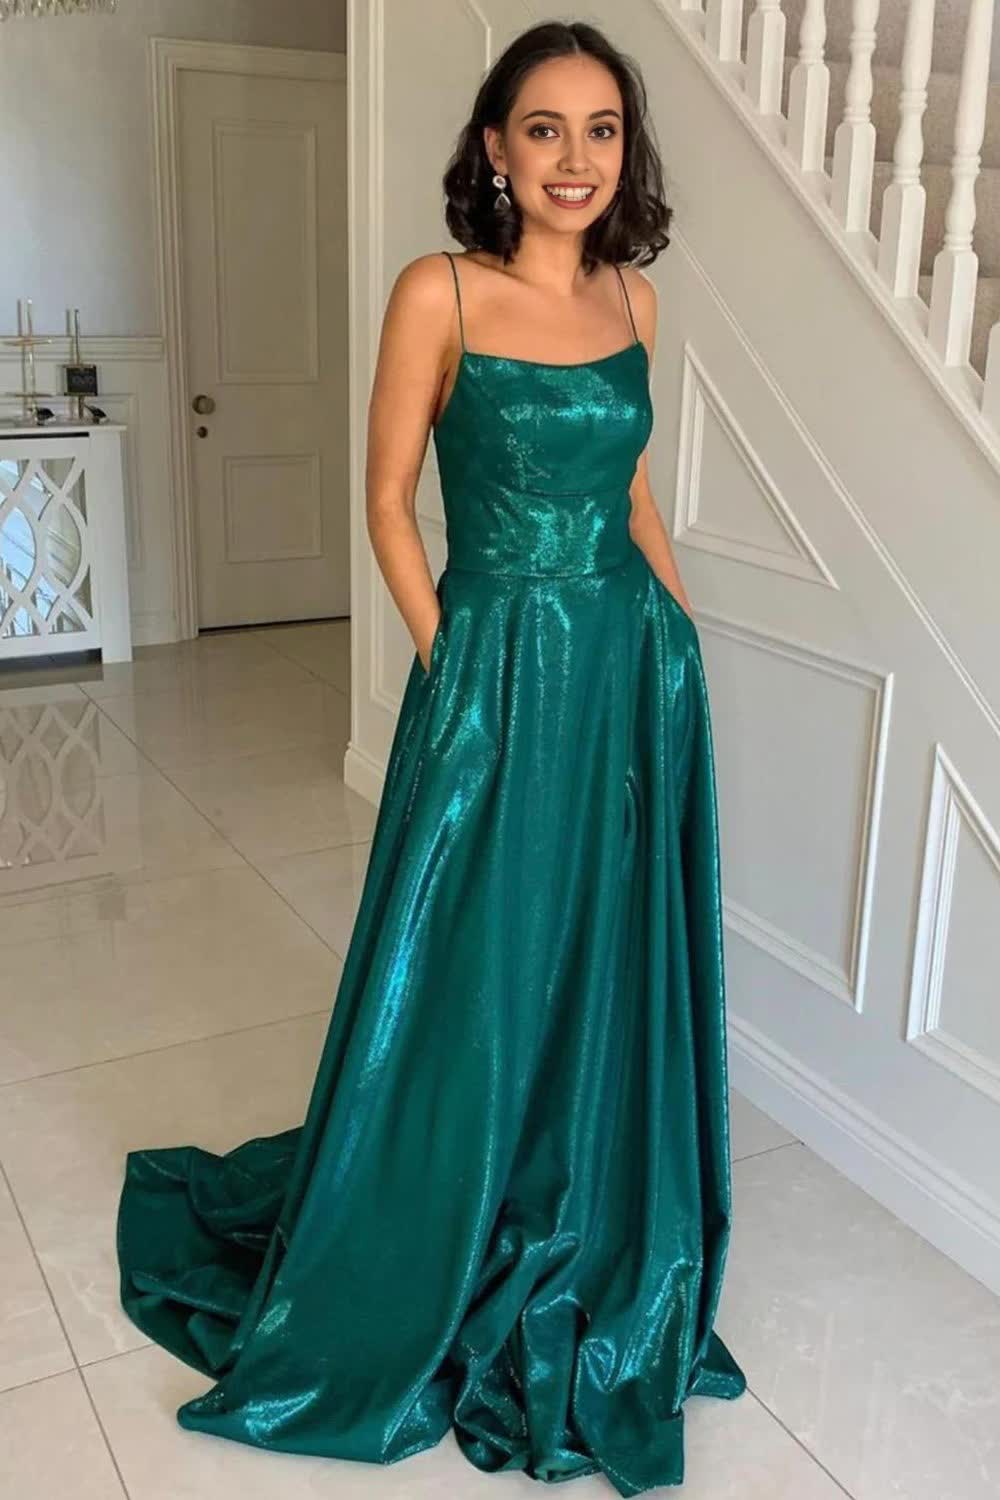 Simple A Line Spaghetti Straps Dark Green Long Corset Prom Dress with Criss Cross Back Gowns, Simple A Line Spaghetti Straps Dark Green Long Prom Dress with Criss Cross Back